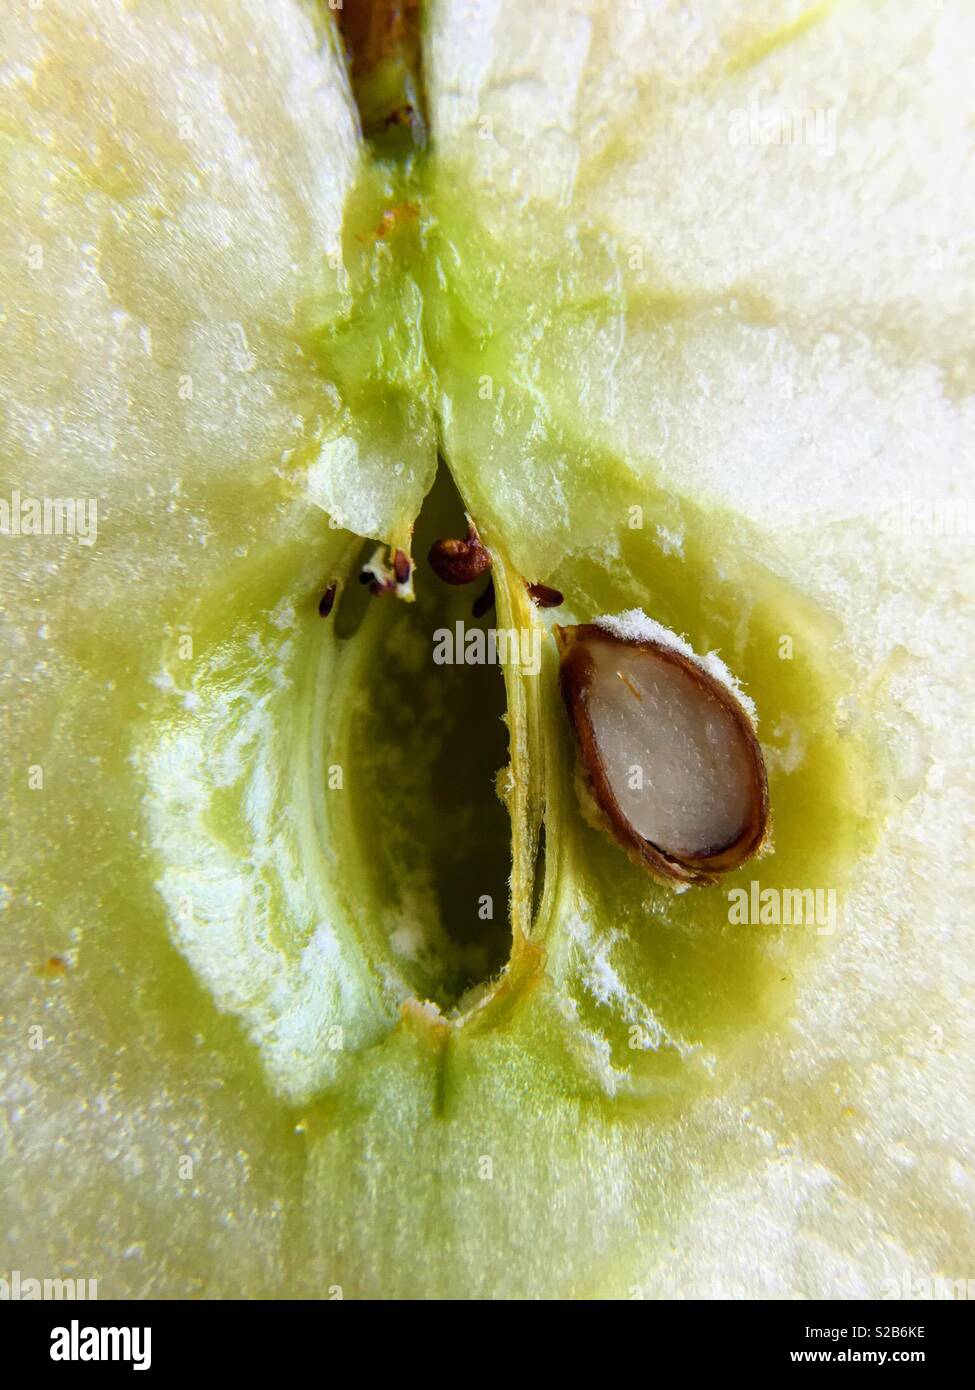 A close up of the centre of an apple core with a pip that has been cut in half. Stock Photo